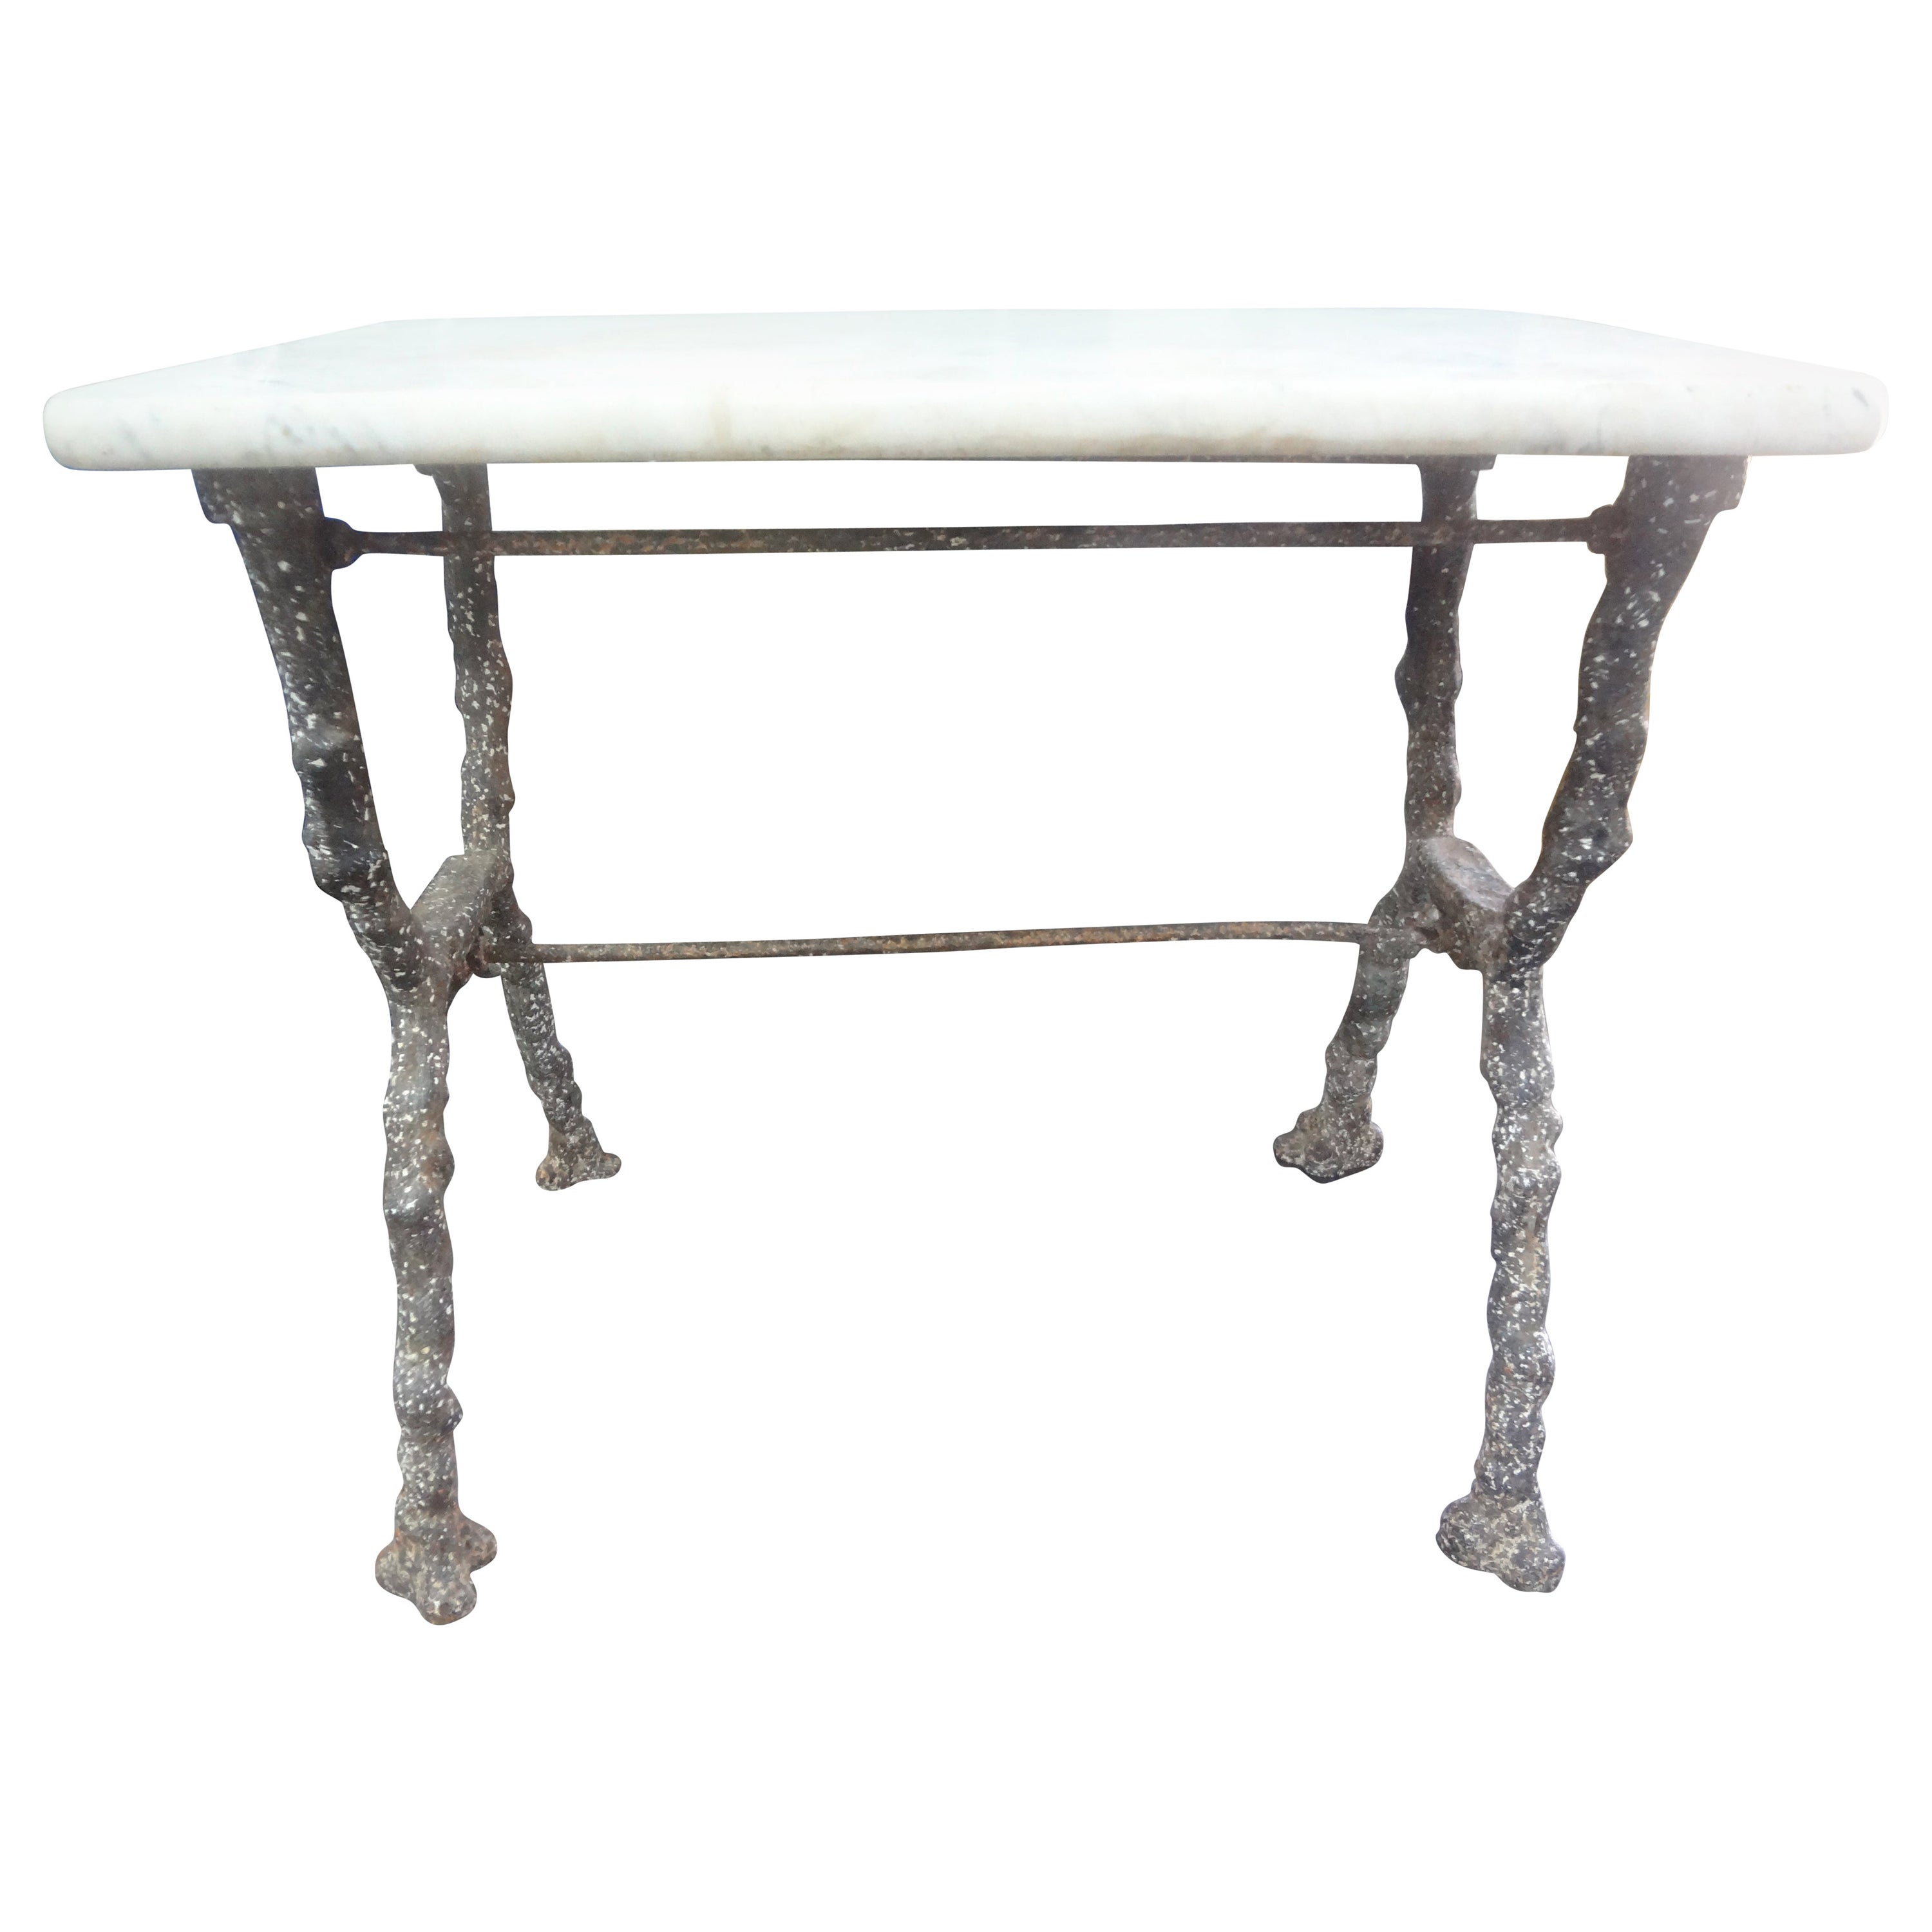 Rare 19th Century French Iron Garden Table With Marble Top By Arras For Sale